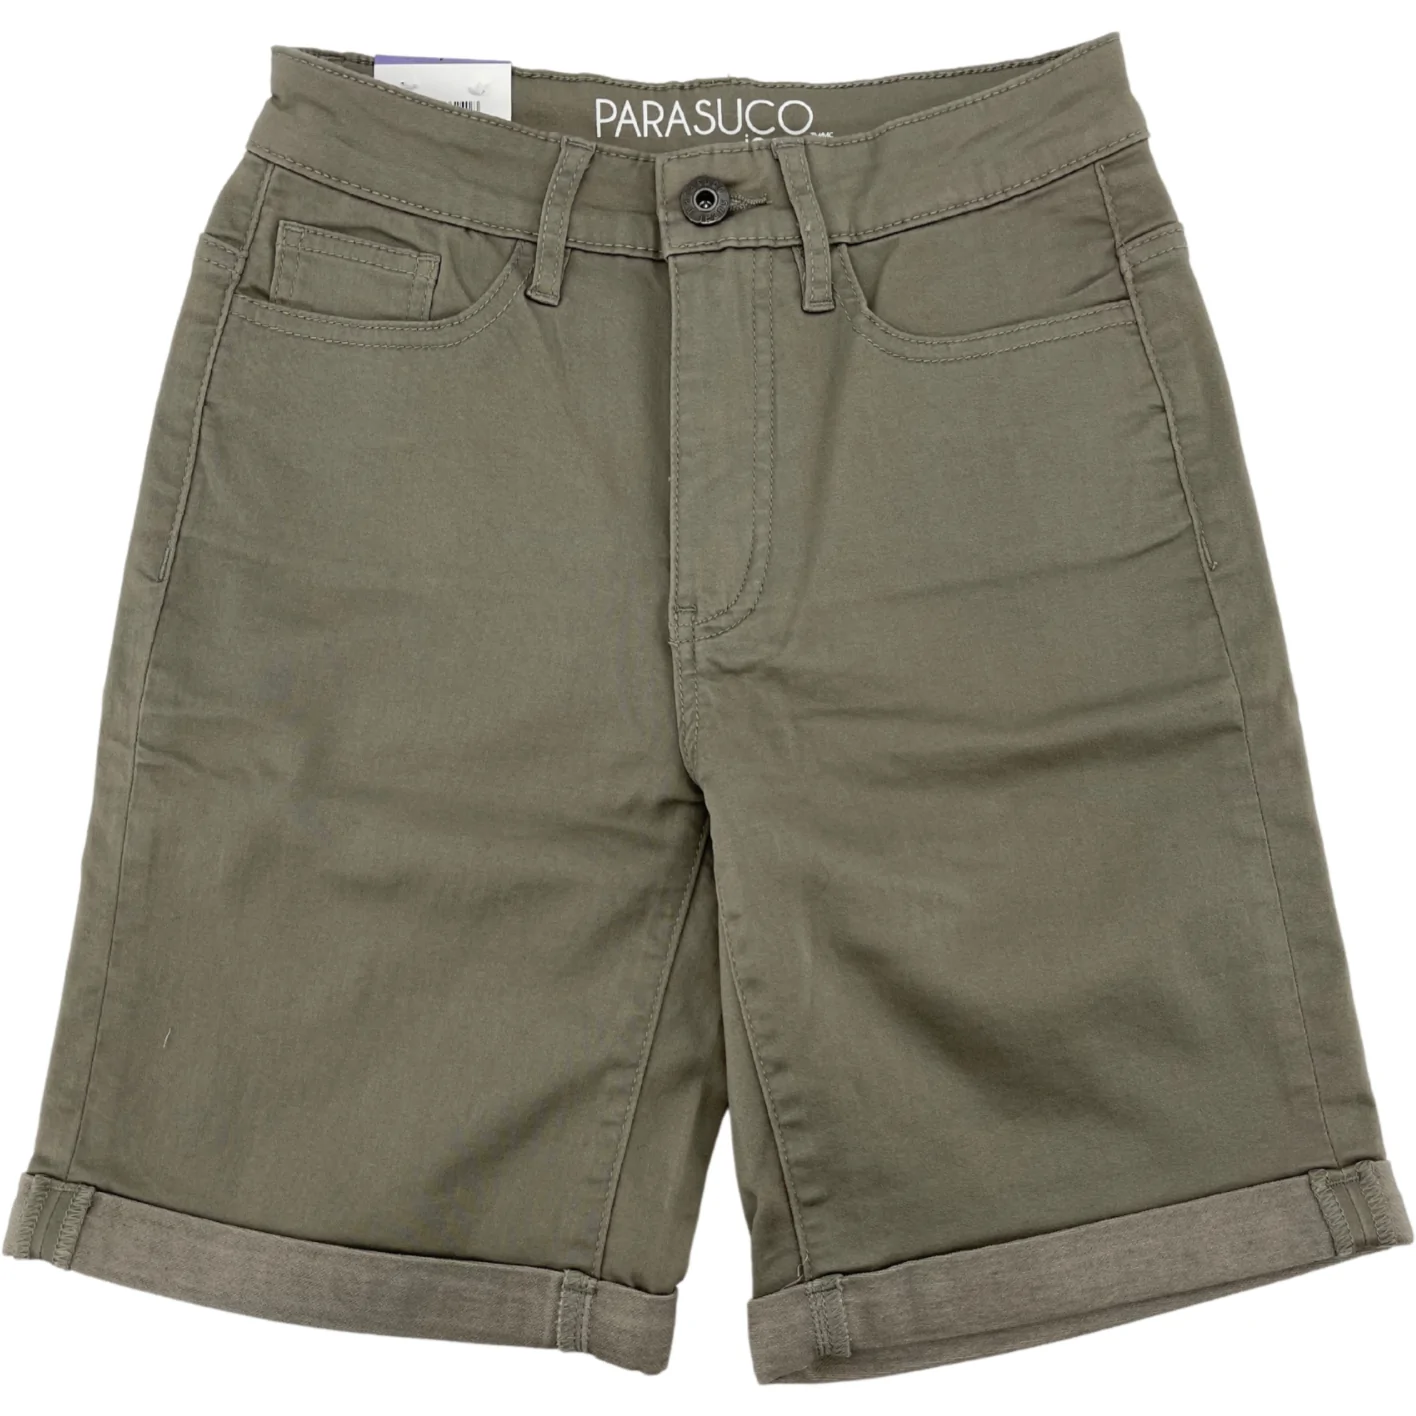 Parasuco Women's Jean Shorts: Taupe / Size 4